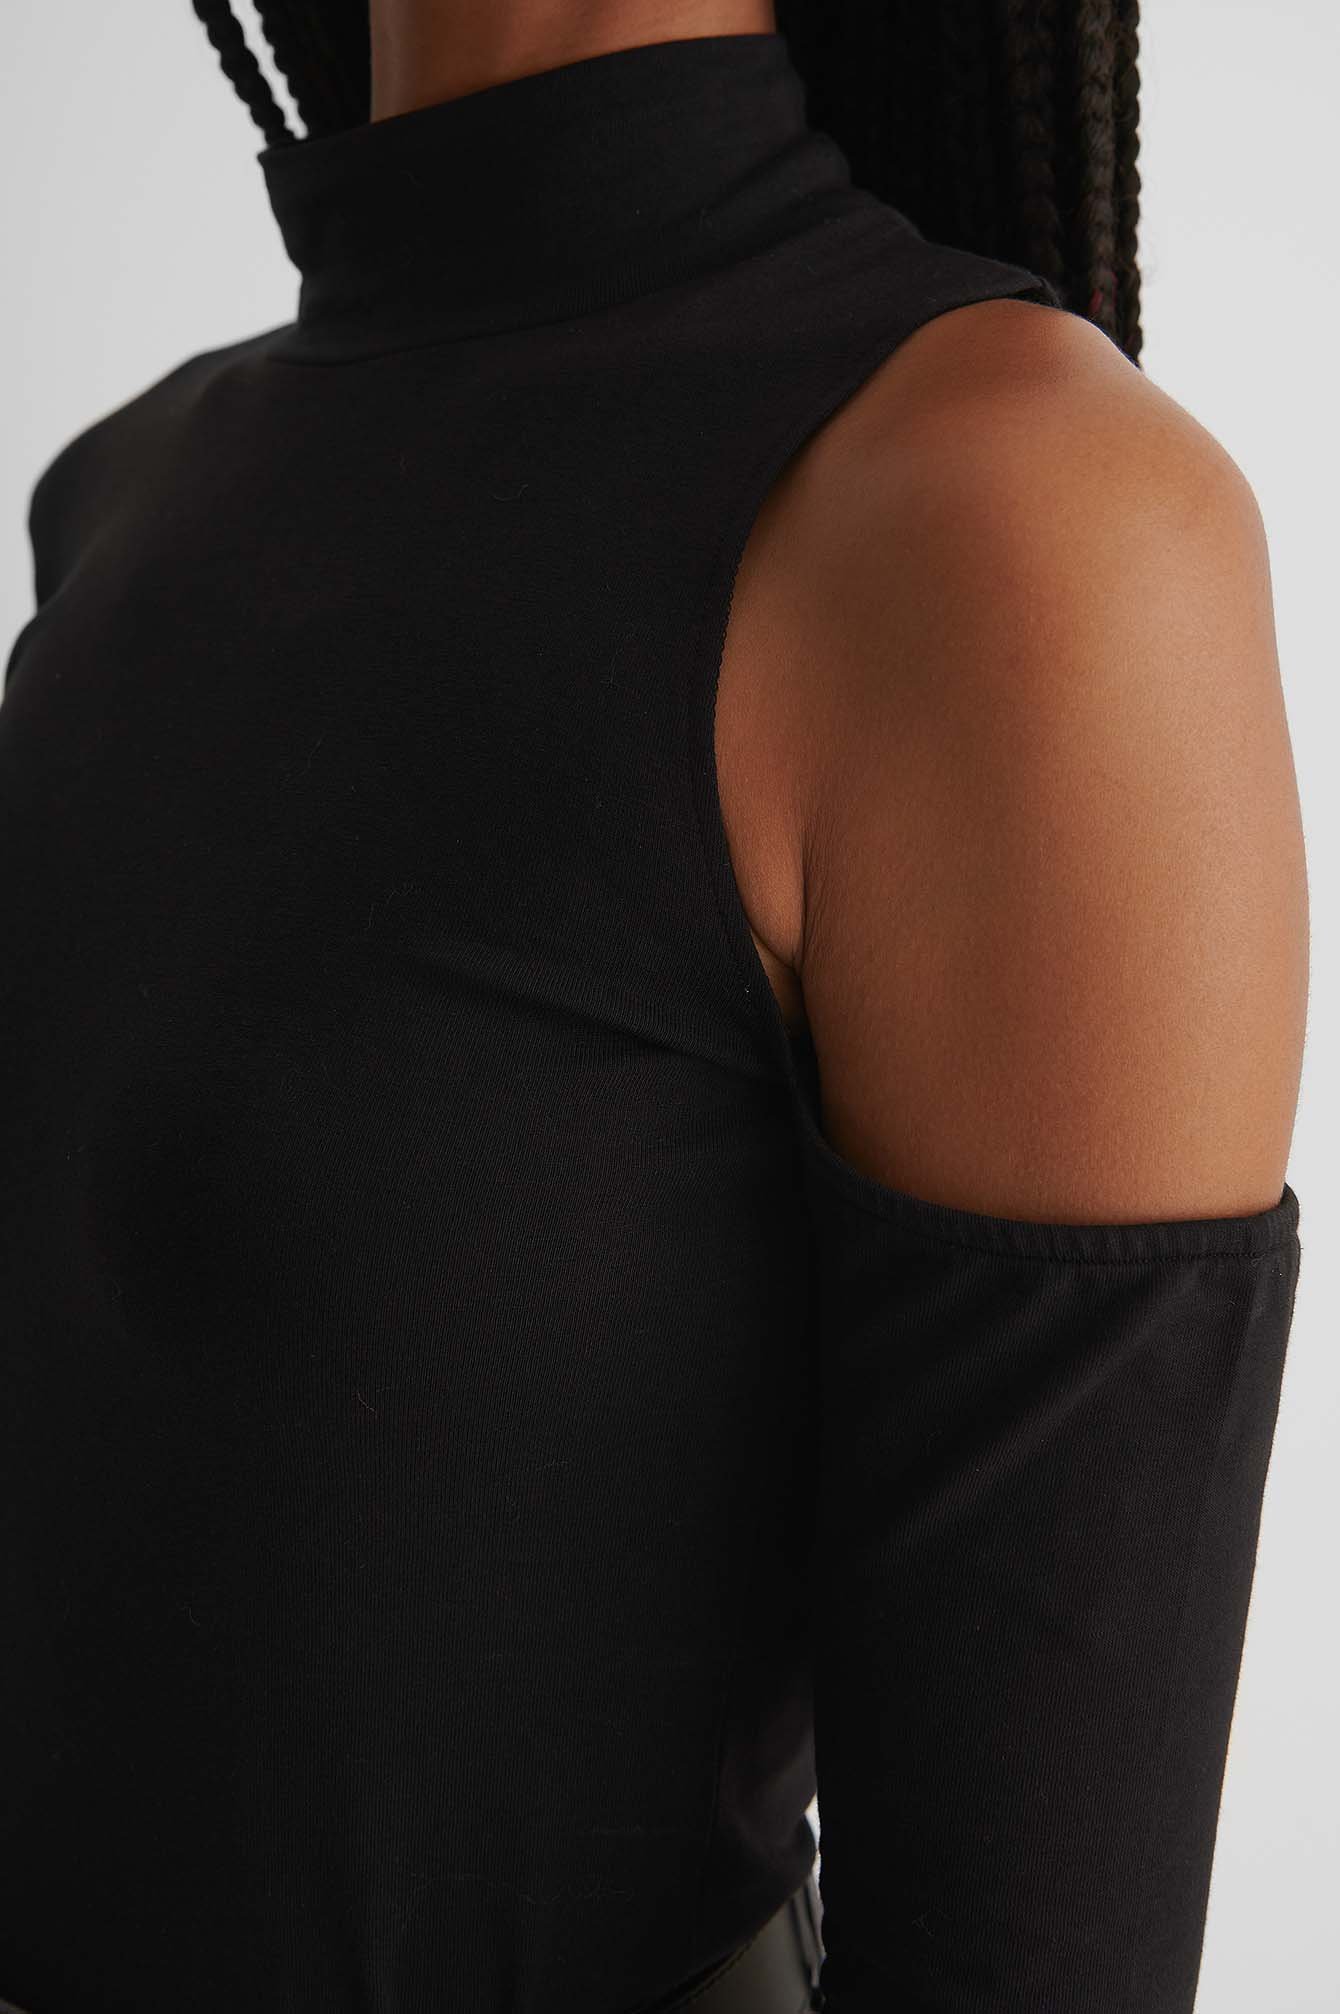 Black One Sleeve Cut Out Shoulder Top